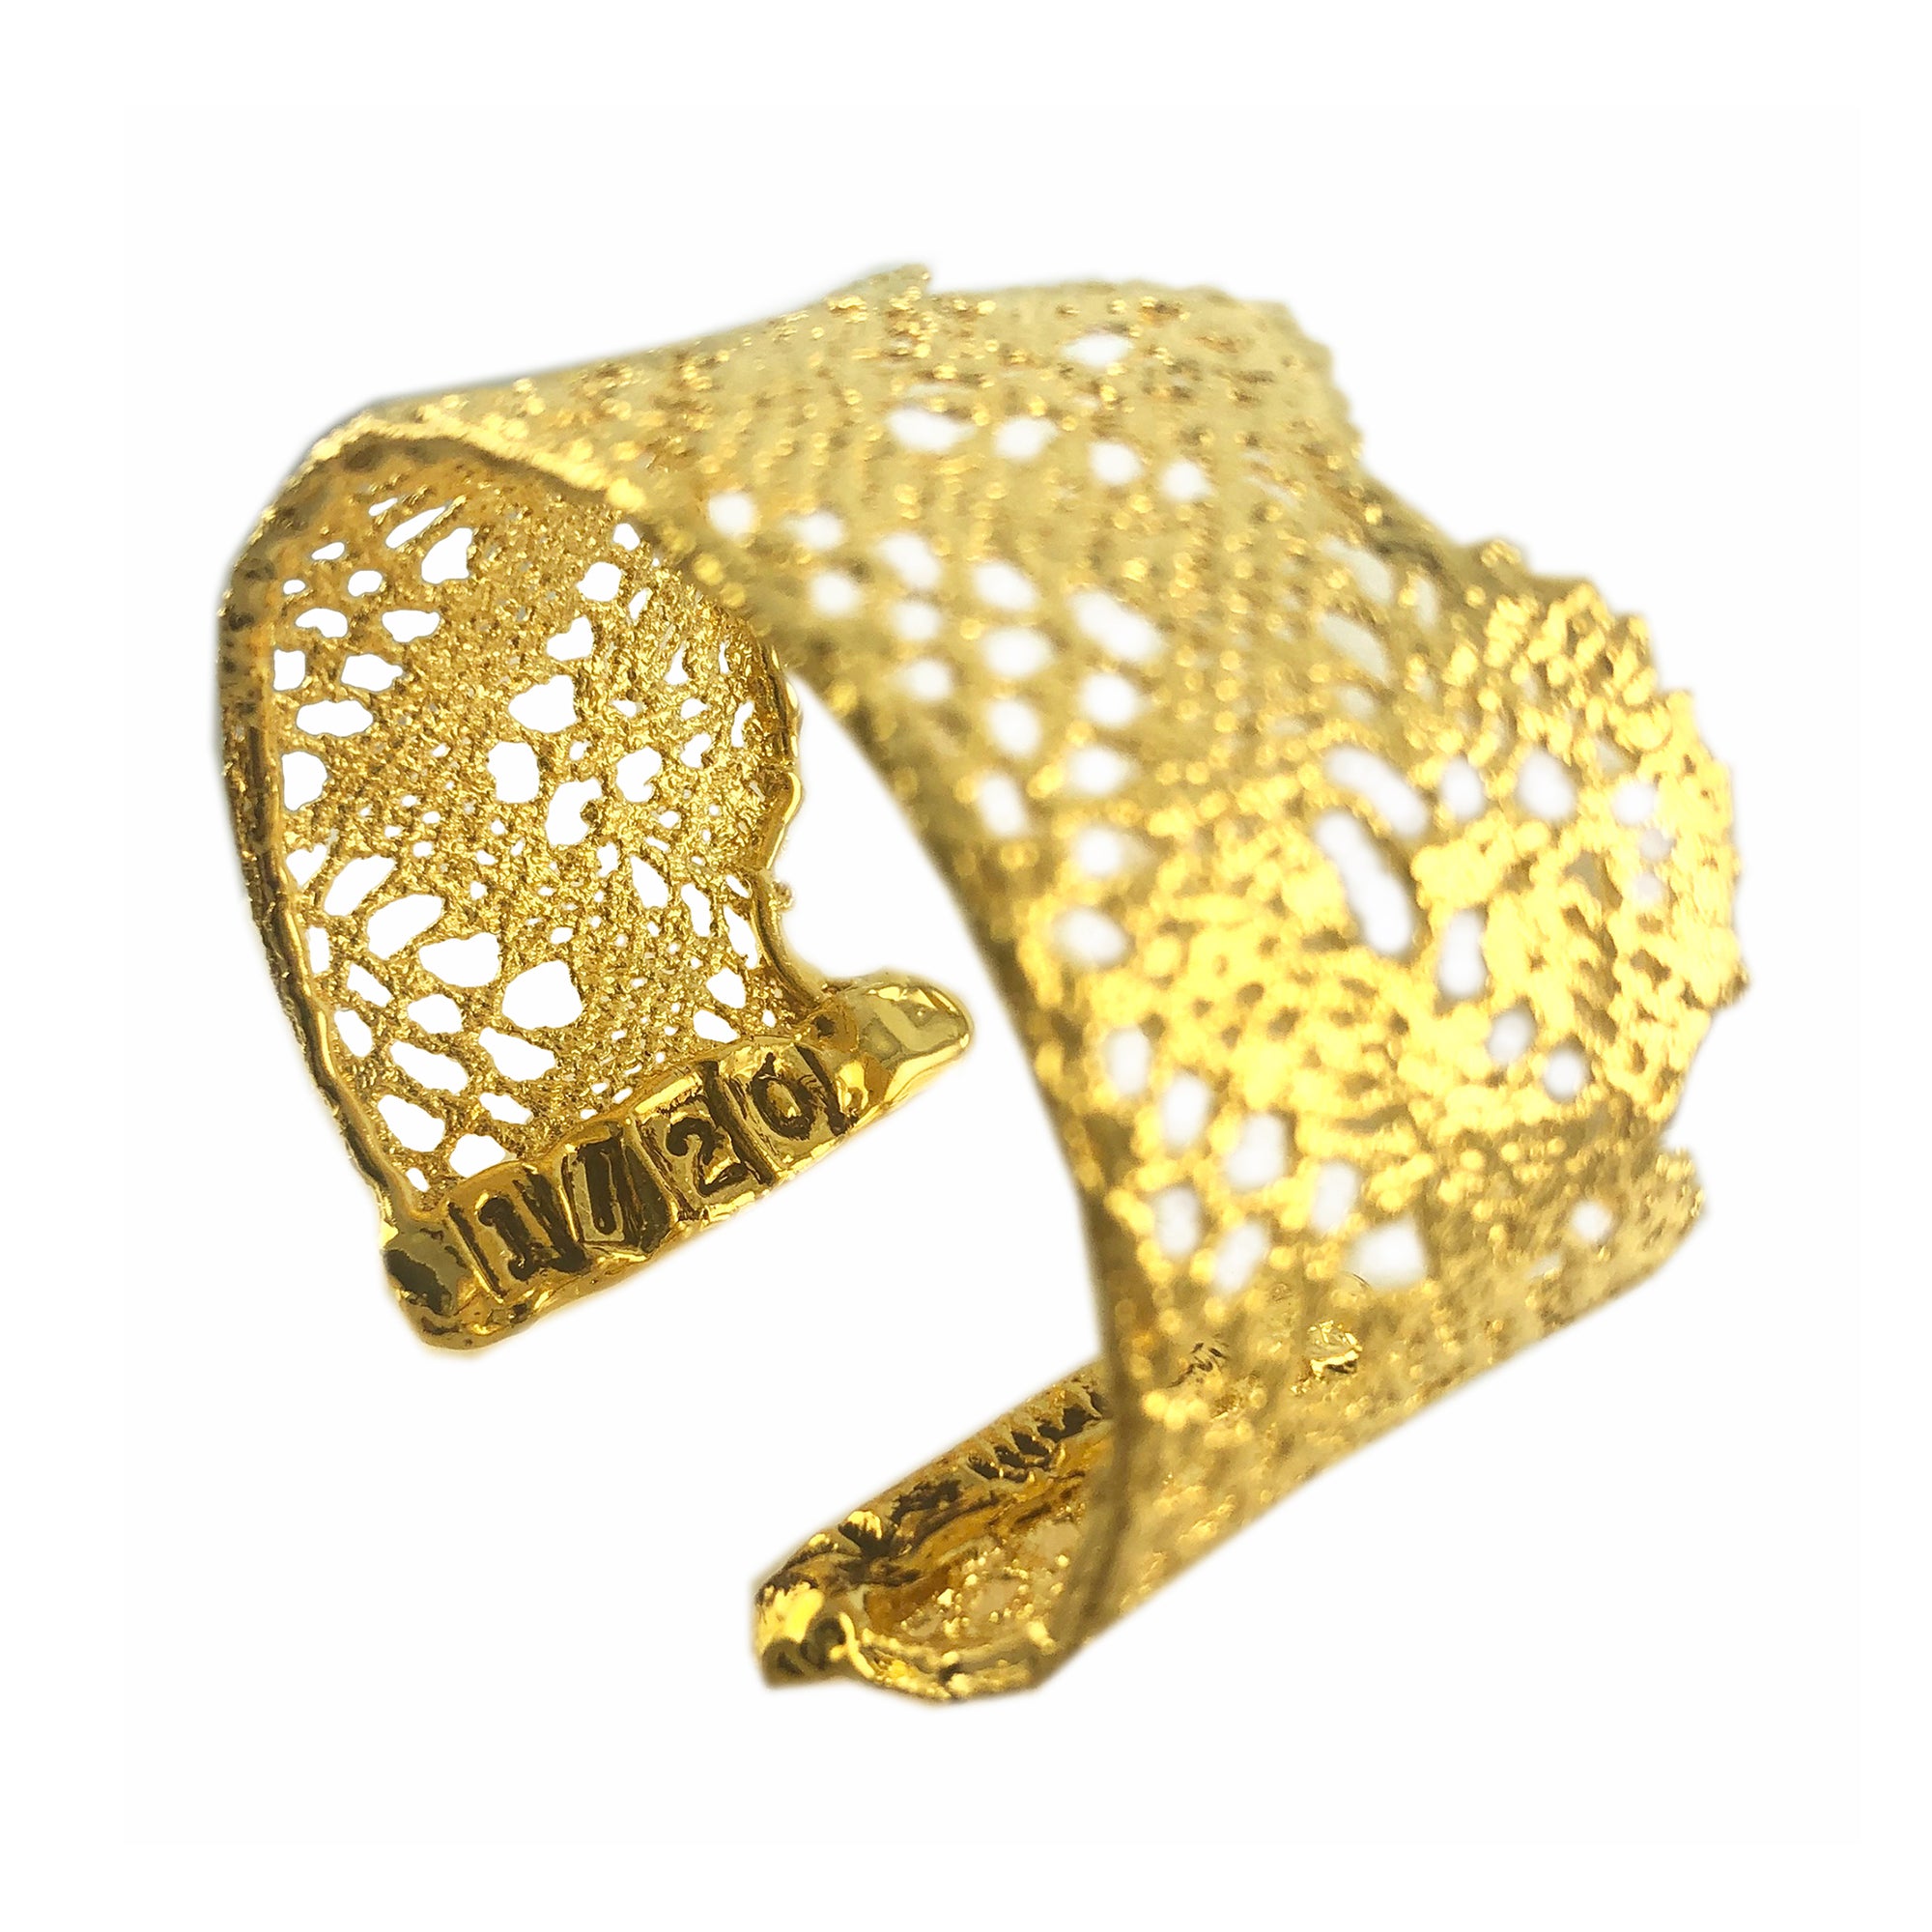 Rare cuff bracelet made from 1890s Swedish lace dipped in 24k gold, only 20 made.